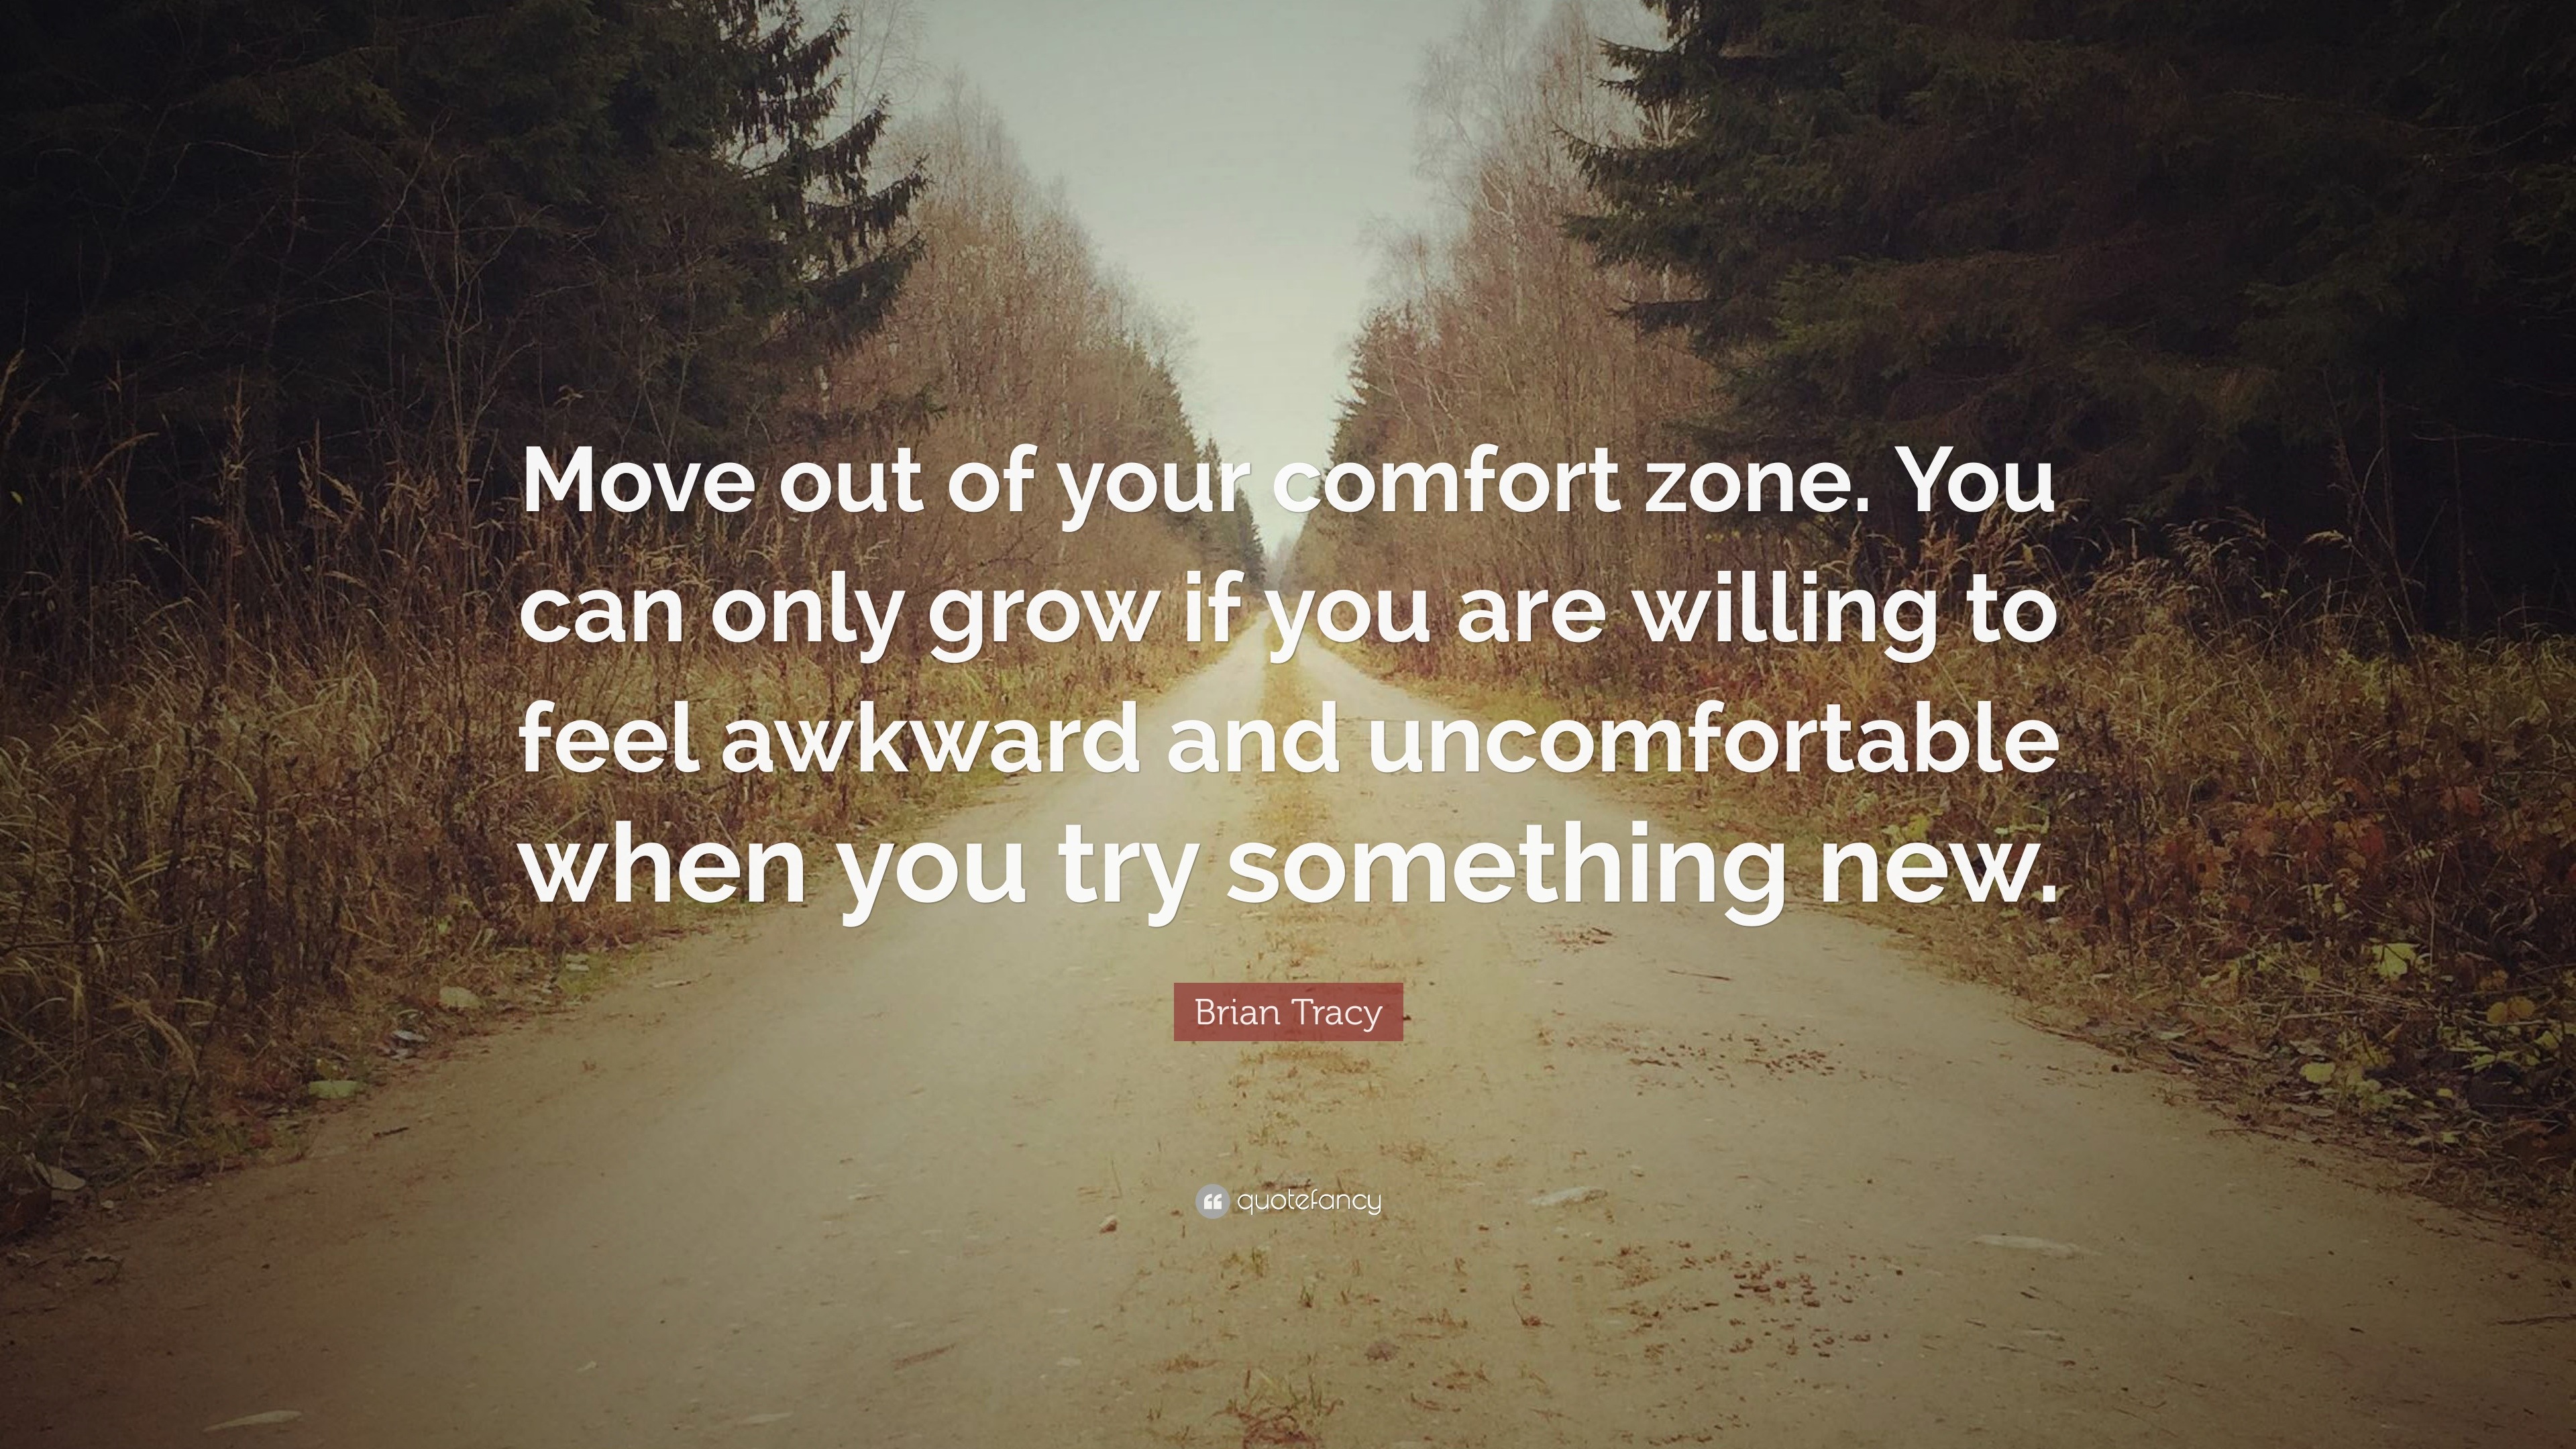 Brian Tracy Quote: “Move out of your comfort zone. You can only grow if